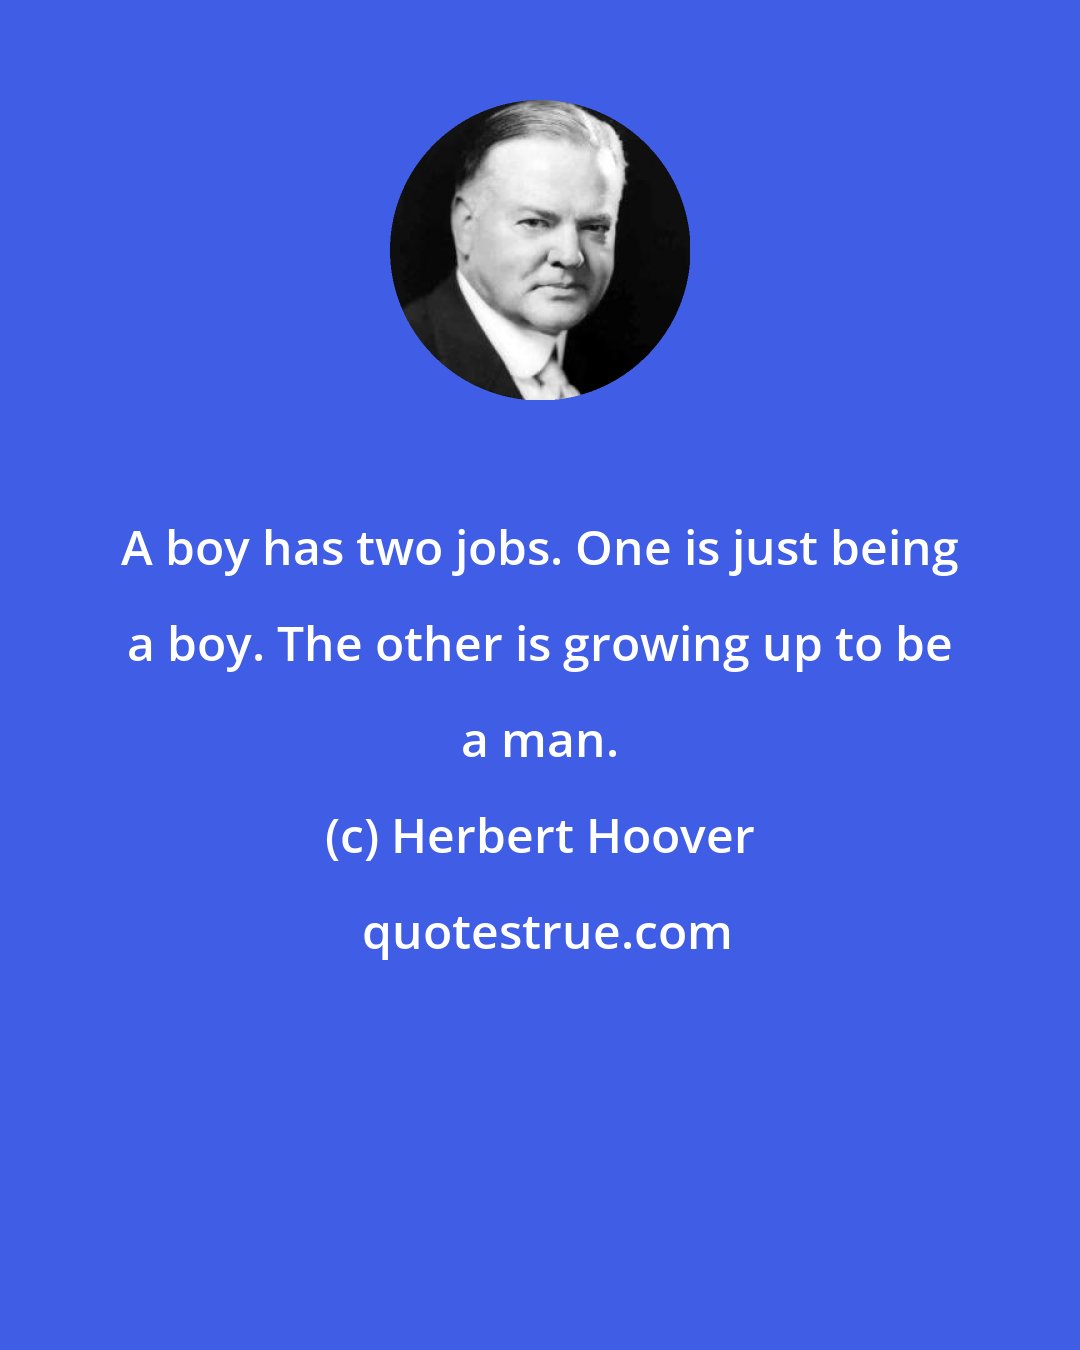 Herbert Hoover: A boy has two jobs. One is just being a boy. The other is growing up to be a man.